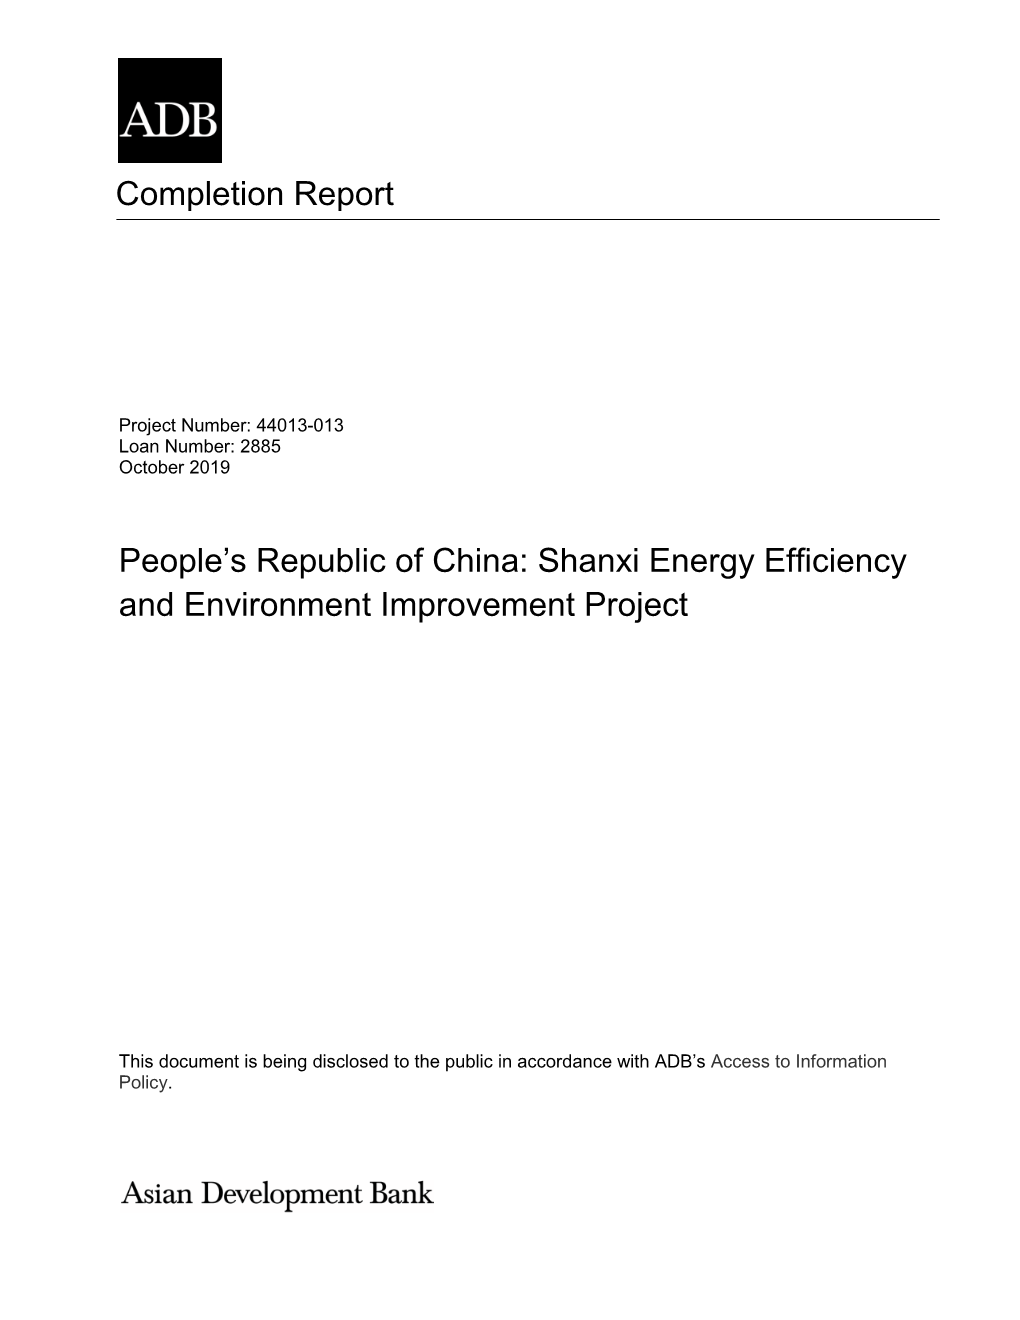 Shanxi Energy Efficiency and Environment Improvement Project